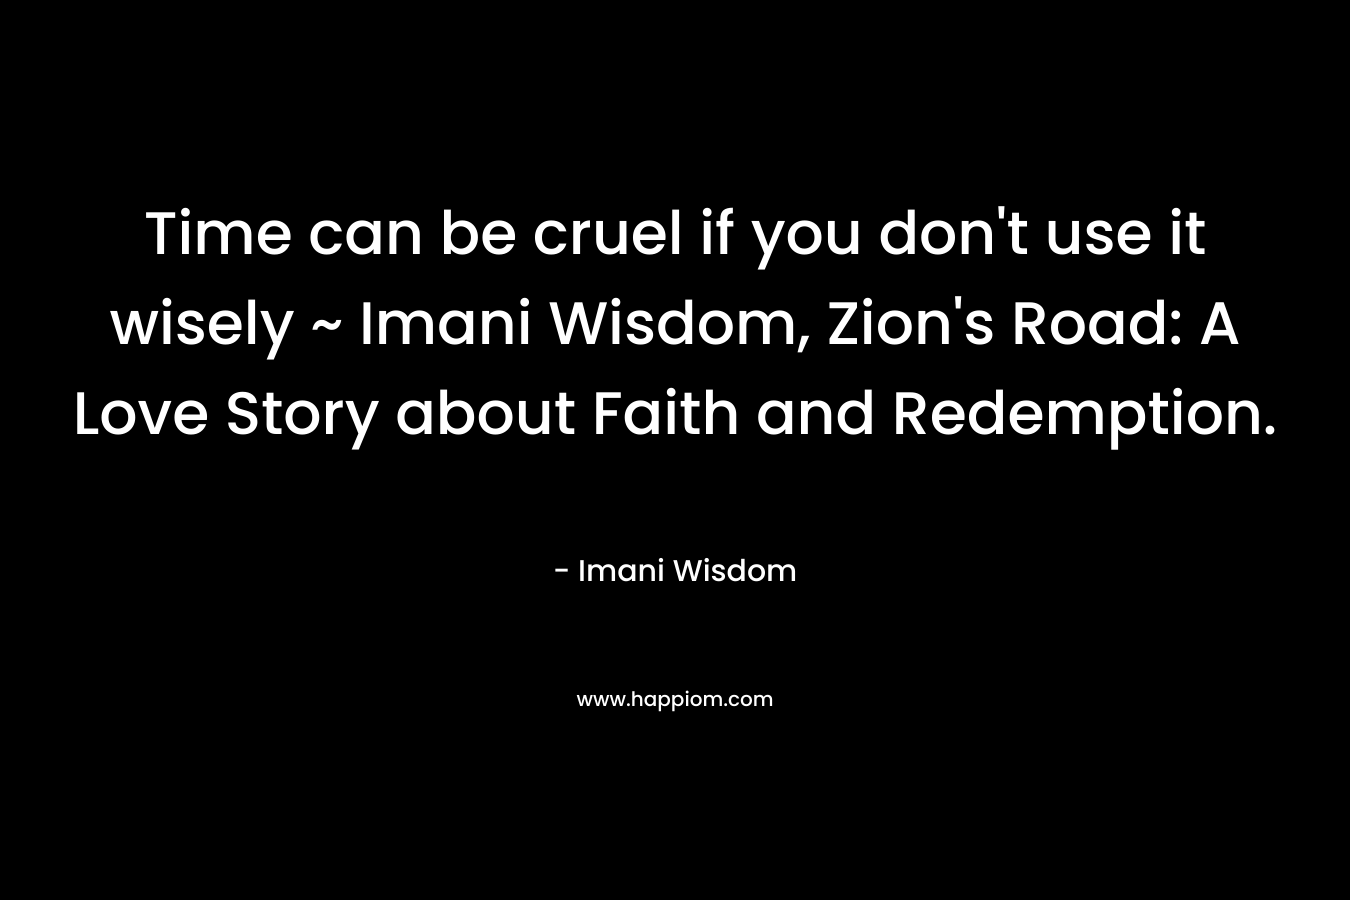 Time can be cruel if you don't use it wisely ~ Imani Wisdom, Zion's Road: A Love Story about Faith and Redemption.